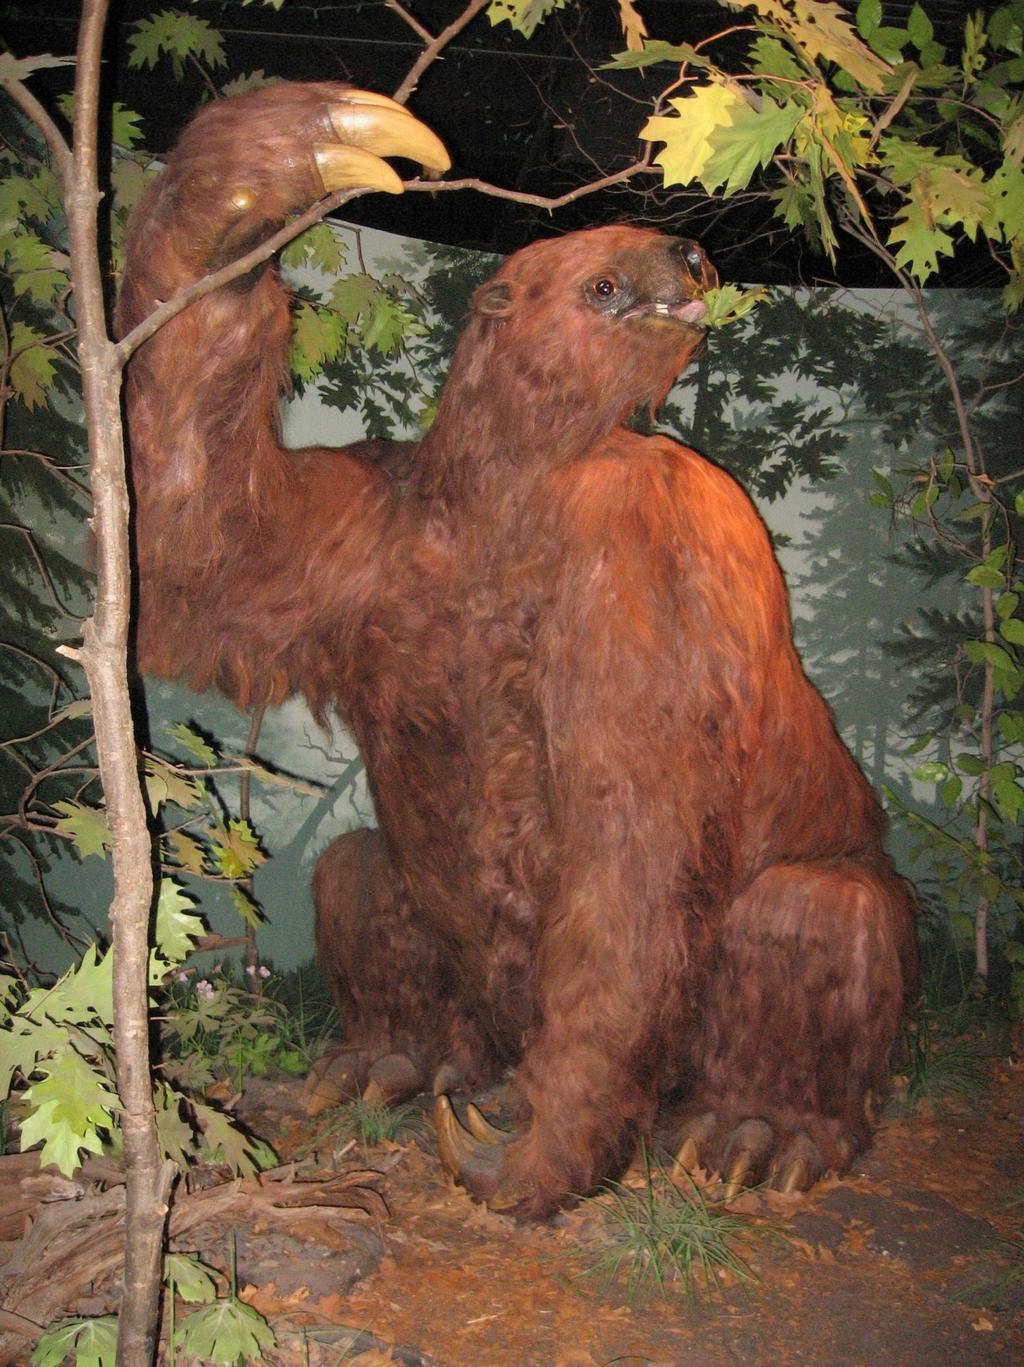 Name: Giant Sloth What did it eat?